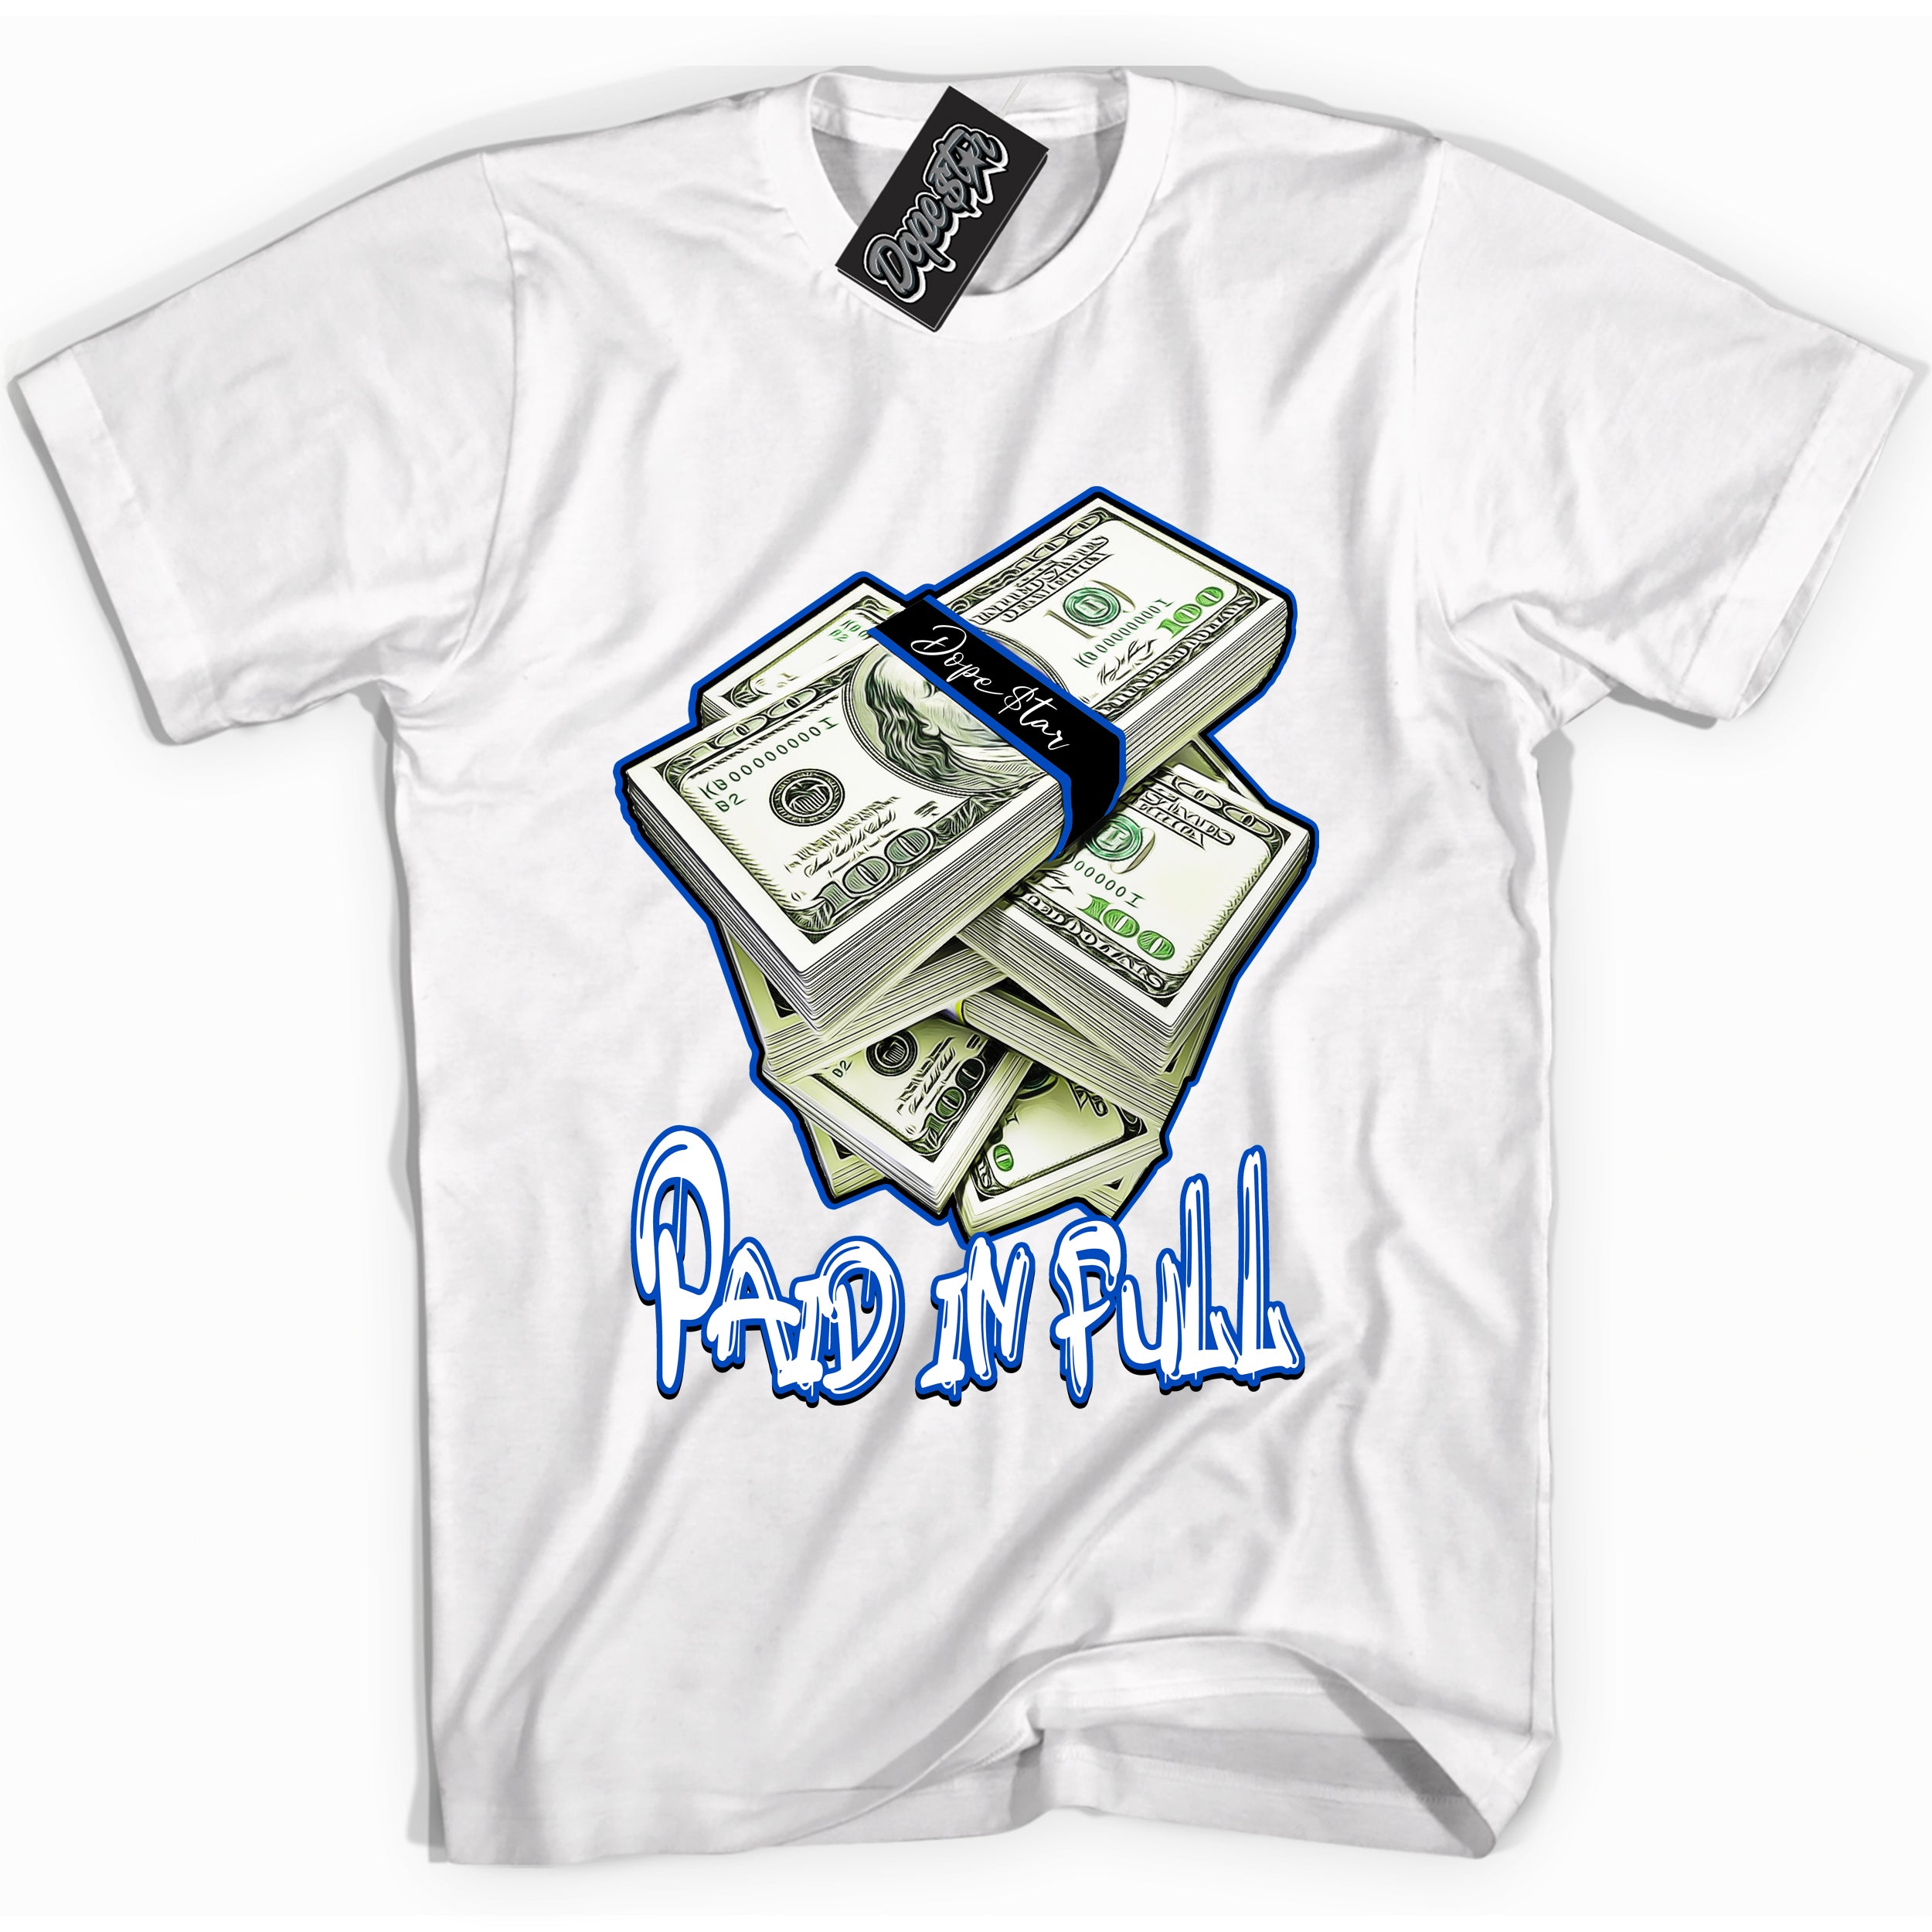 Cool White graphic tee with Paid In Full print, that perfectly matches OG Royal Reimagined 1s sneakers 